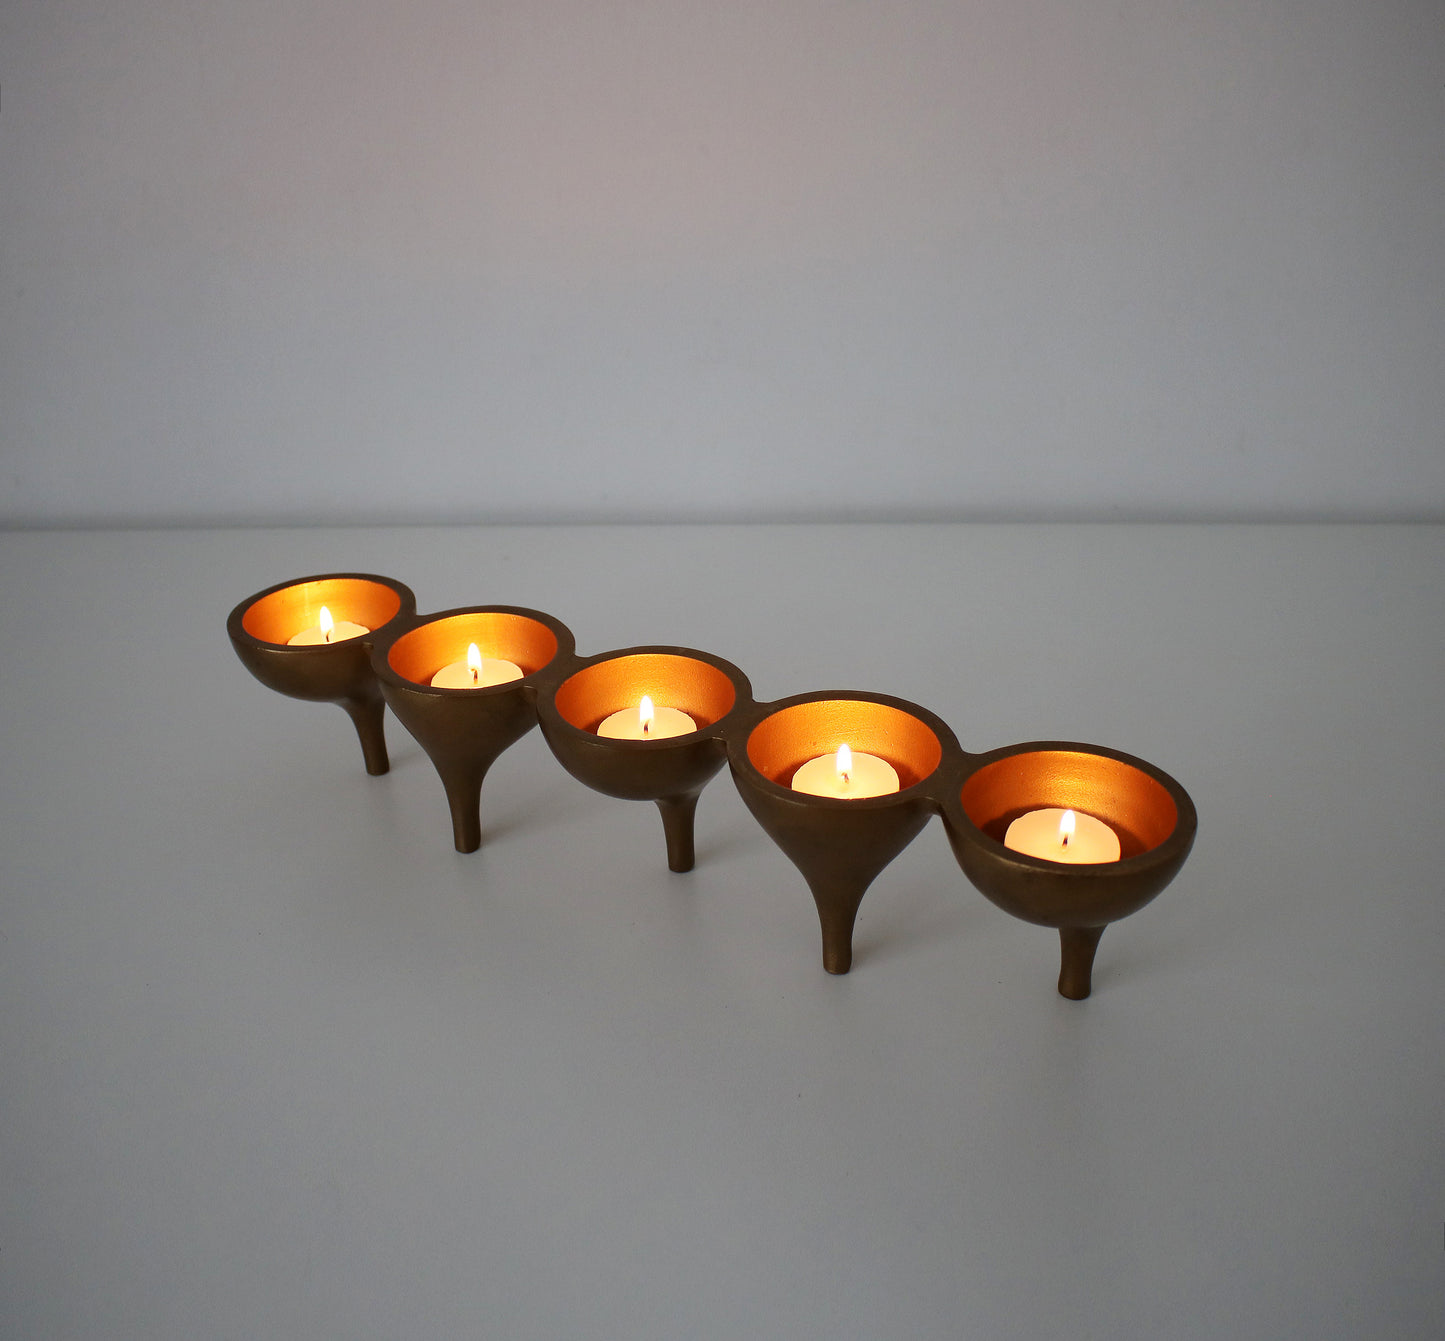 Contemporary preloved tealight candle holder - gold metal